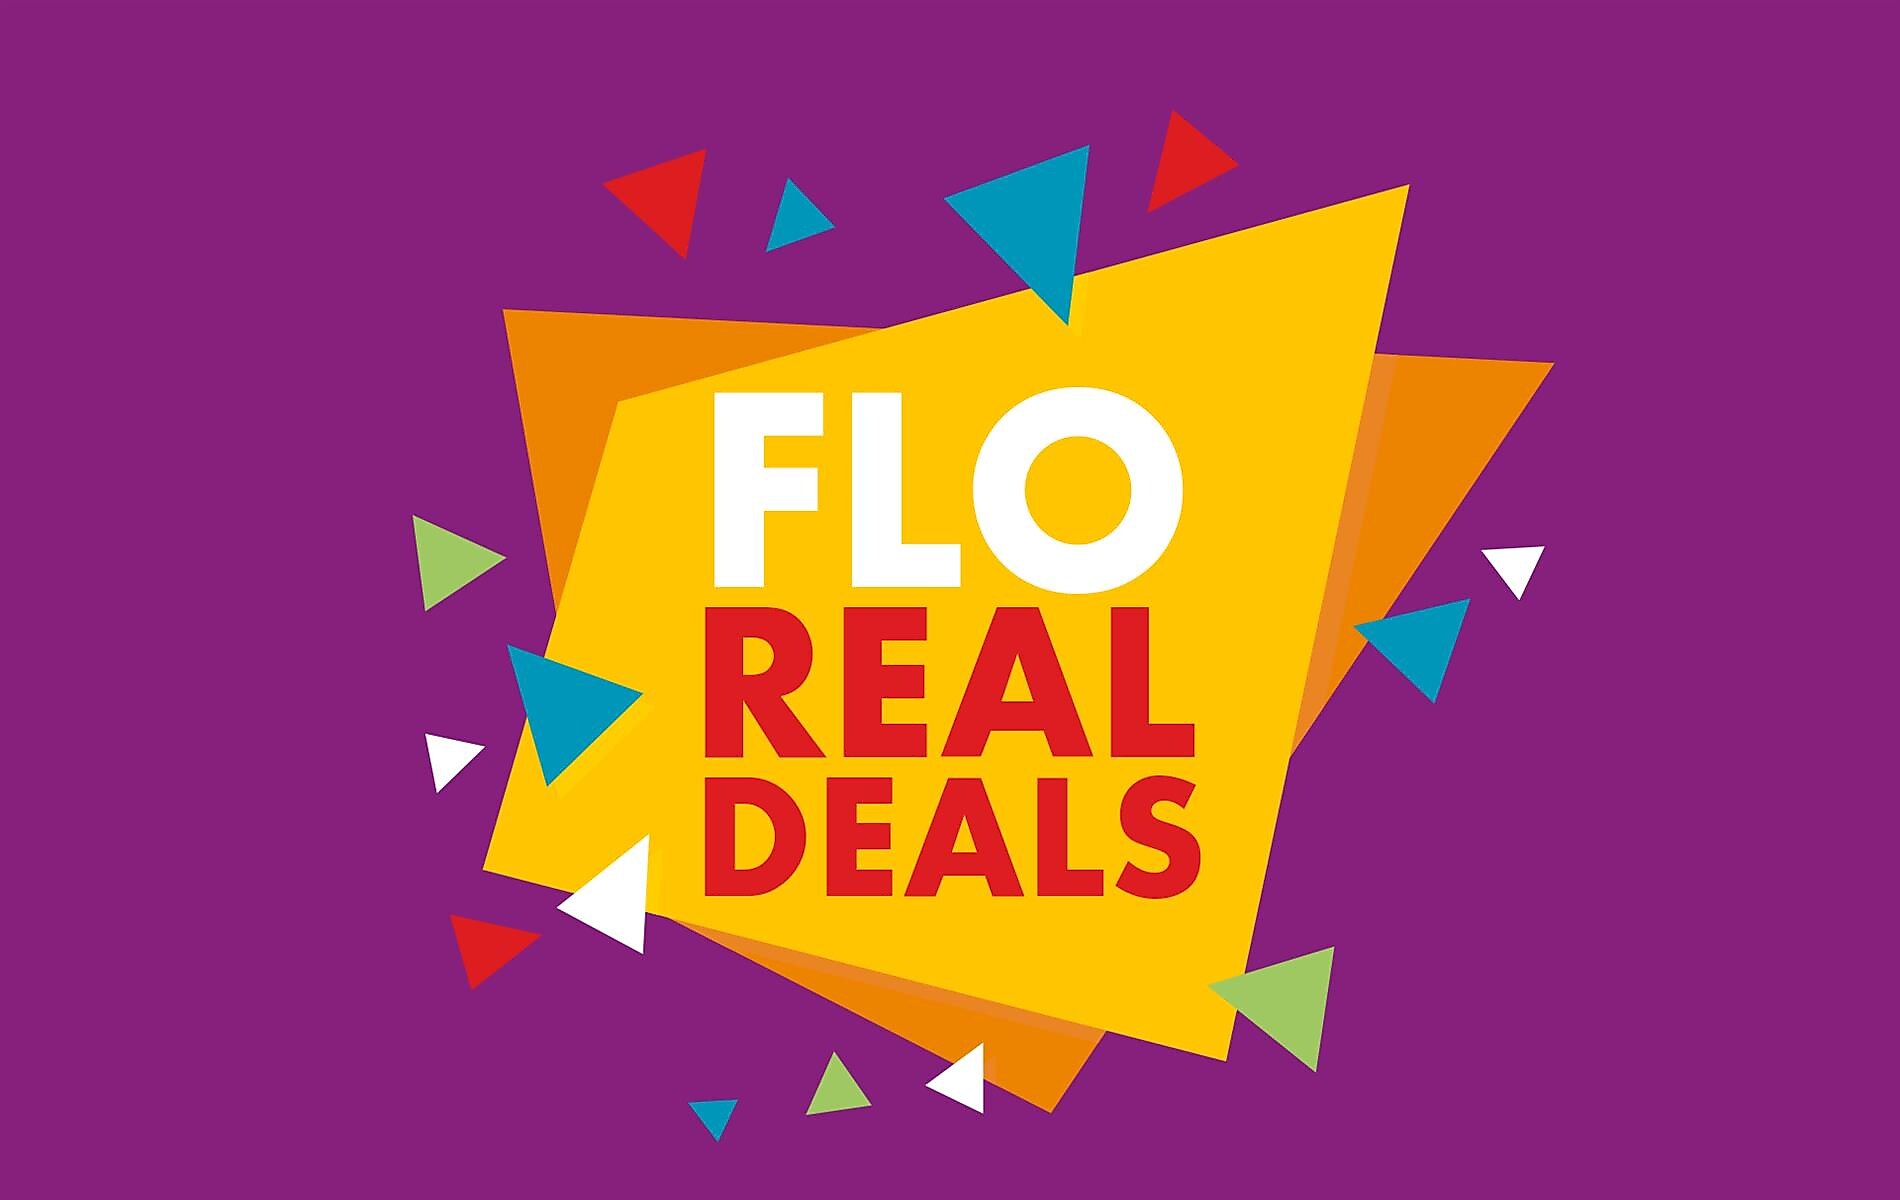 FLO REAL DEALS ARE BACK!